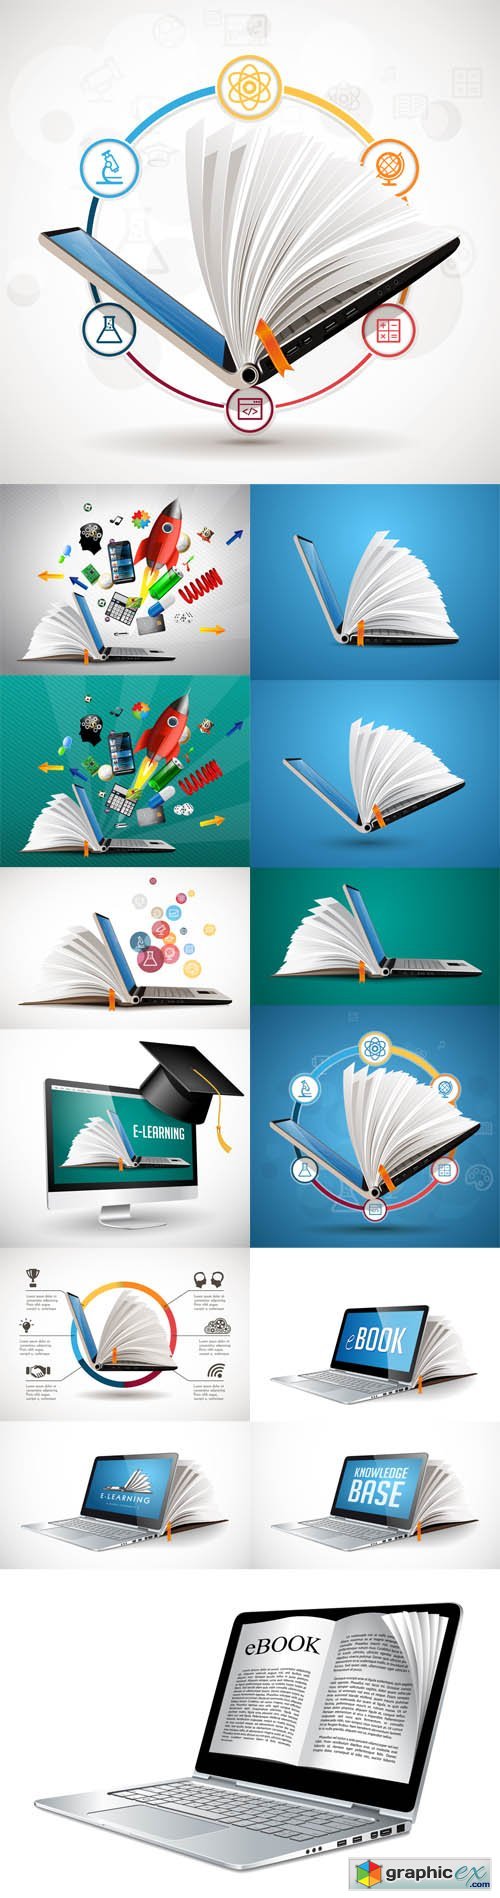 Elearning Concept Online System